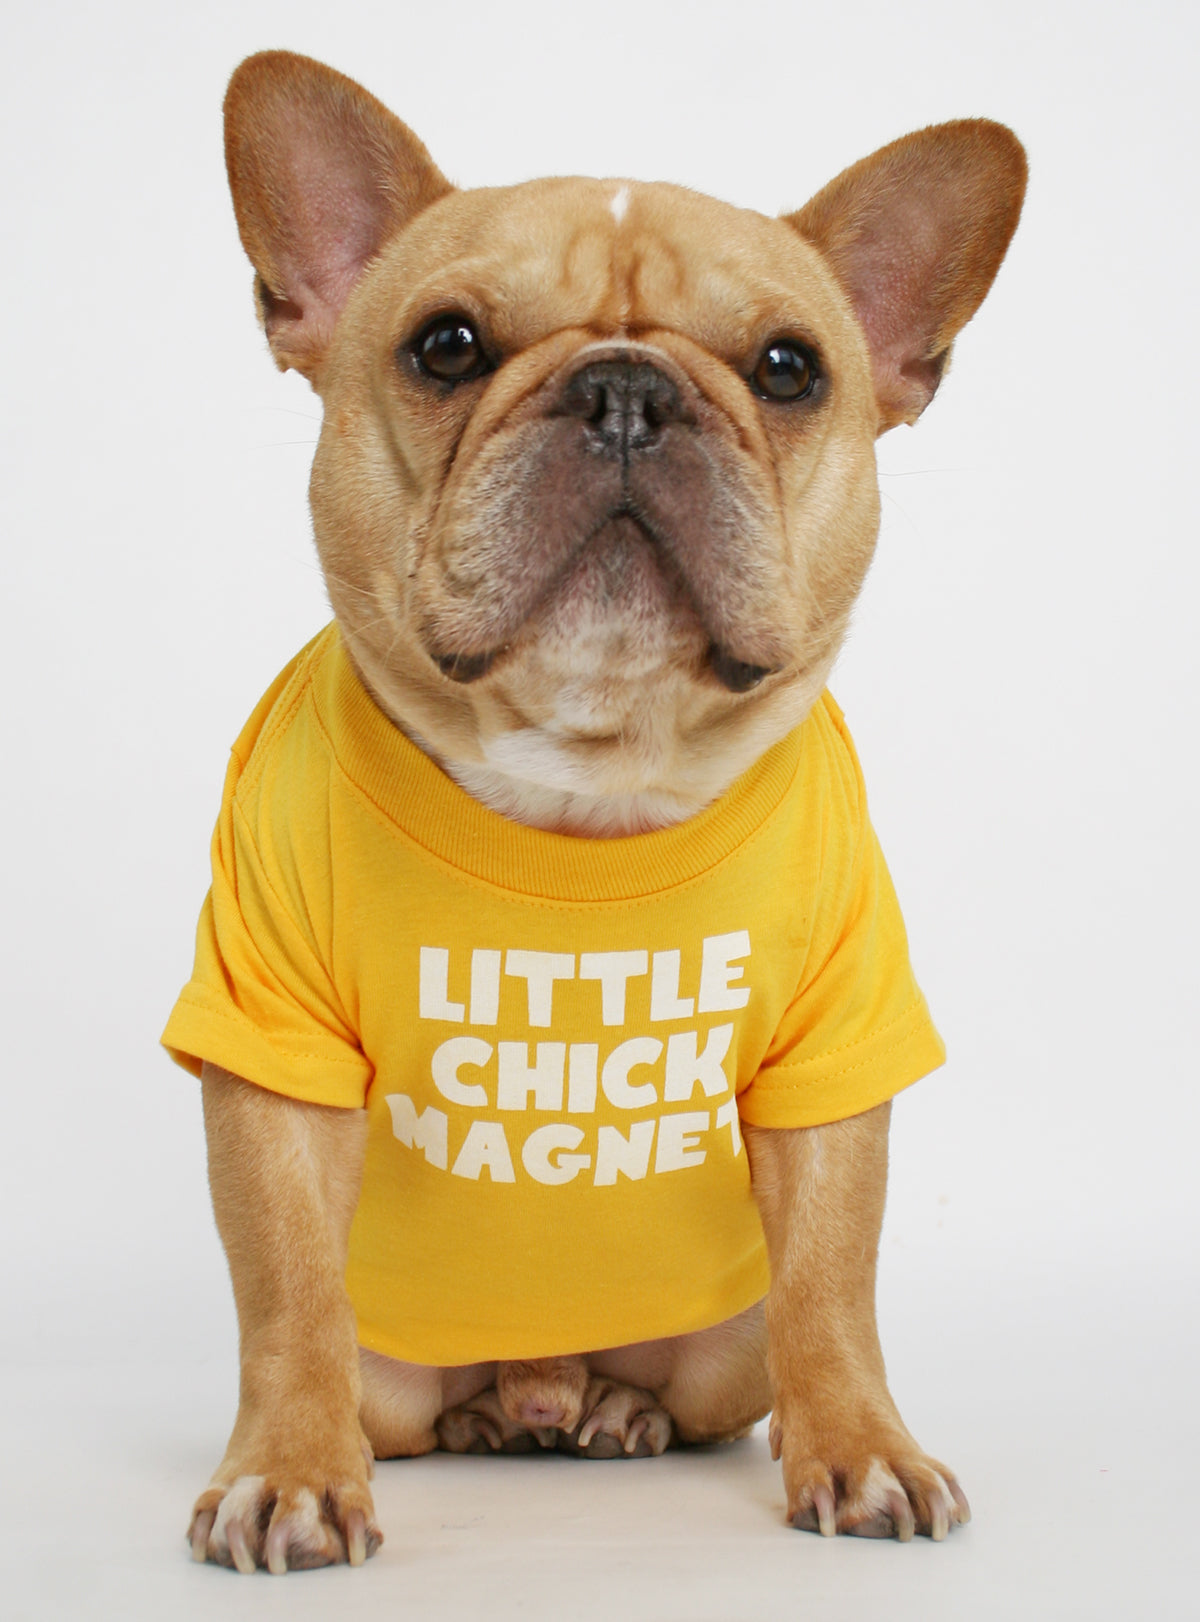 Little Chick Magnet Dog Tee